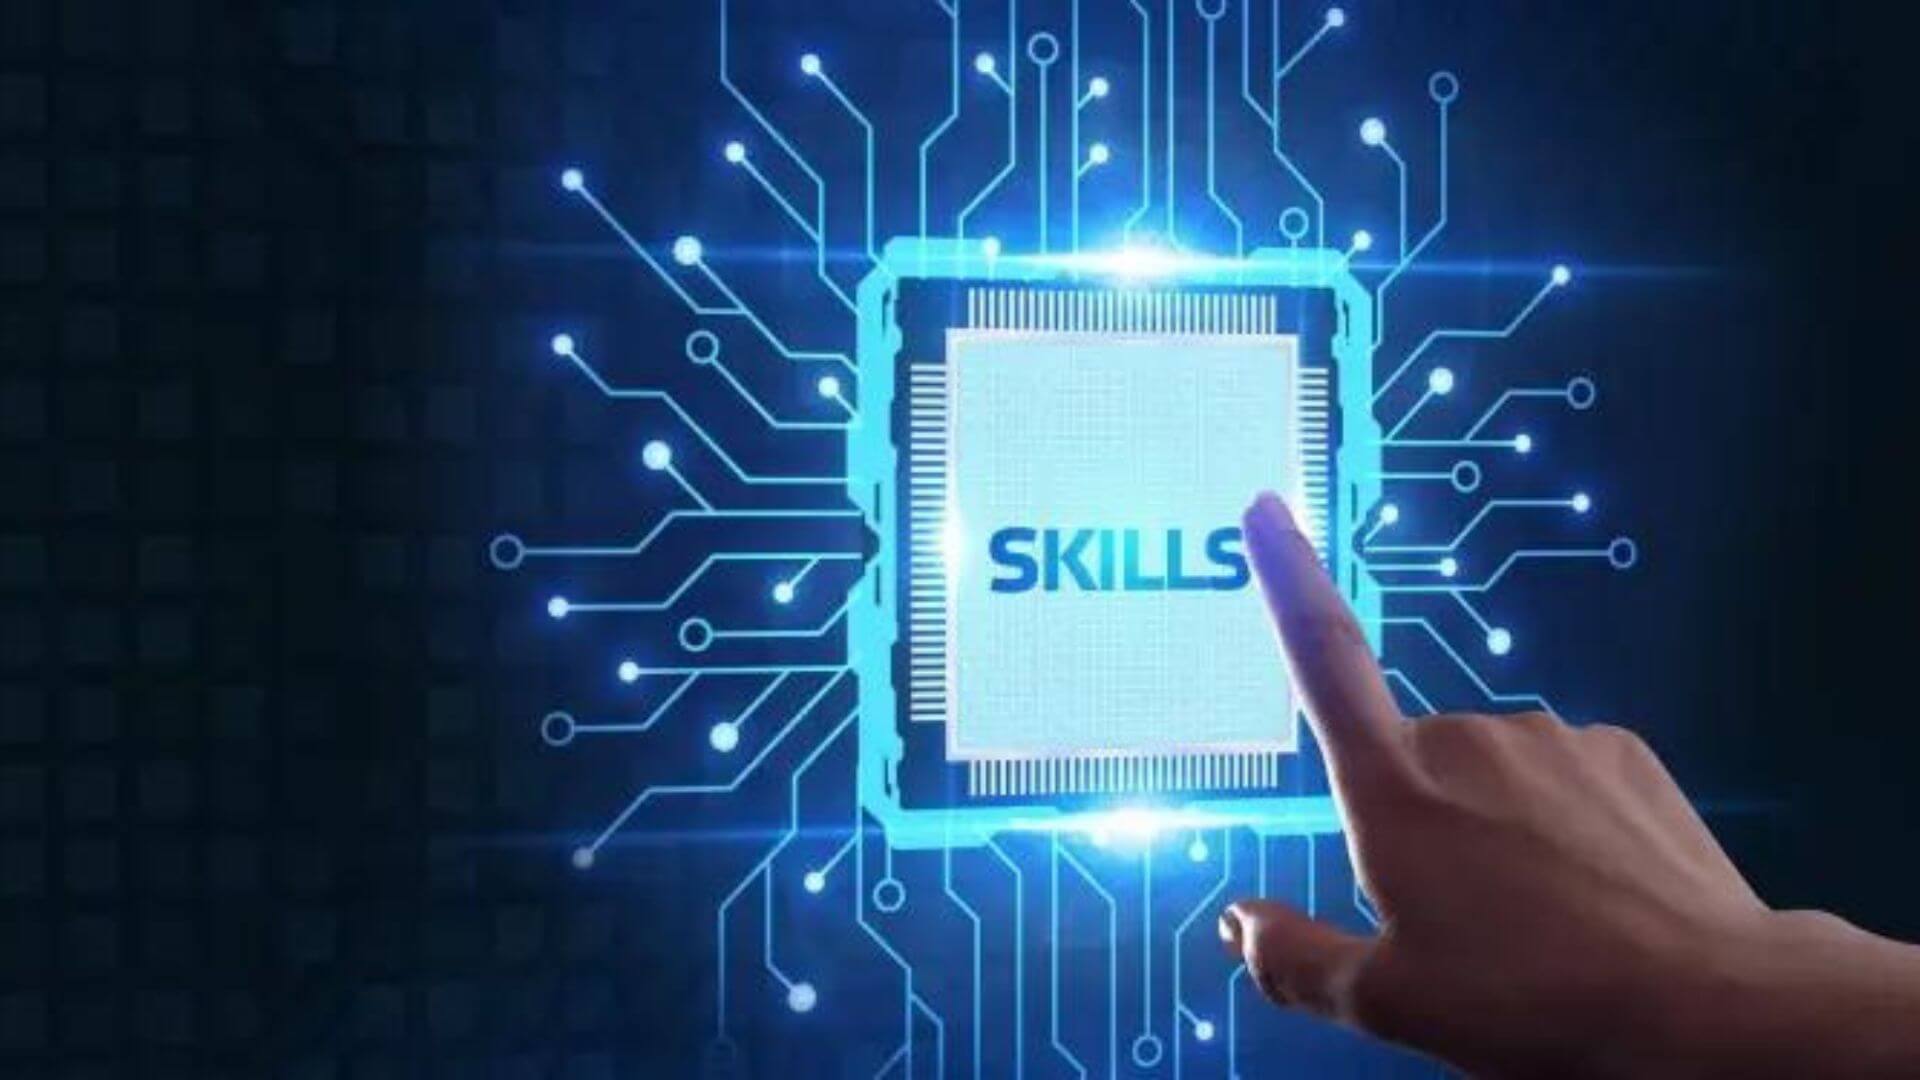 Four Digital Skills You Need To Cultivate To Thrive In The New World Of Work